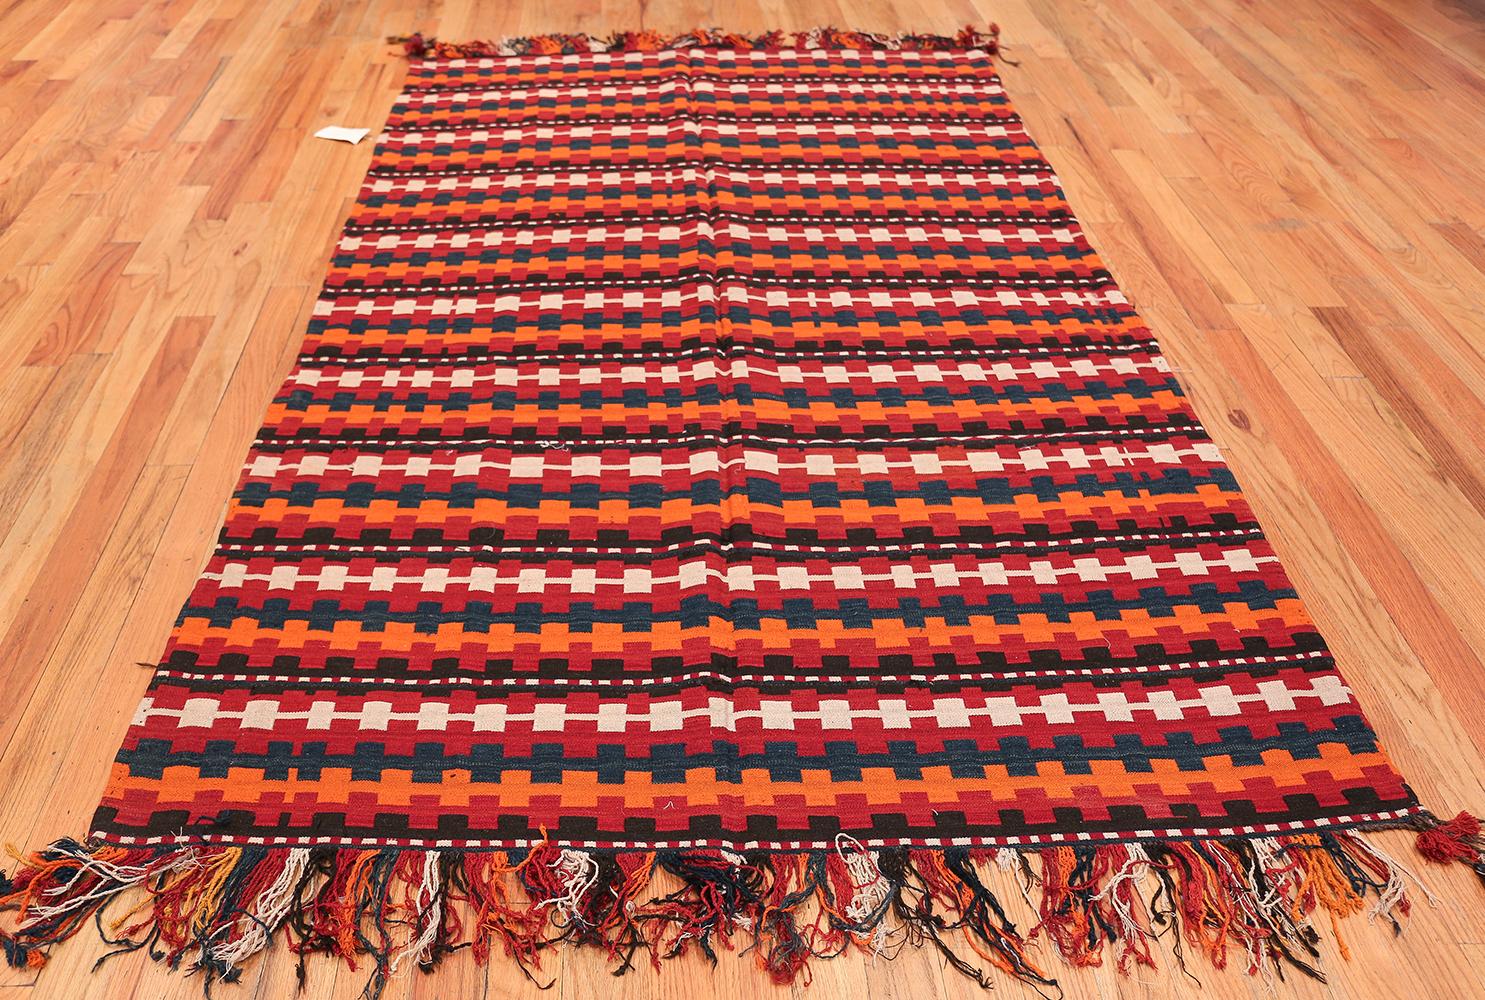 Vintage Caucasian Kilim rug, country of origin: Caucasia, date: circa mid-20th century. Size: 5 ft 6 in x 9 ft (1.68 m x 2.74 m)

Like many other unique vintage Caucasian Kilims, this vintage rug conveys a distinct sense of presence and style